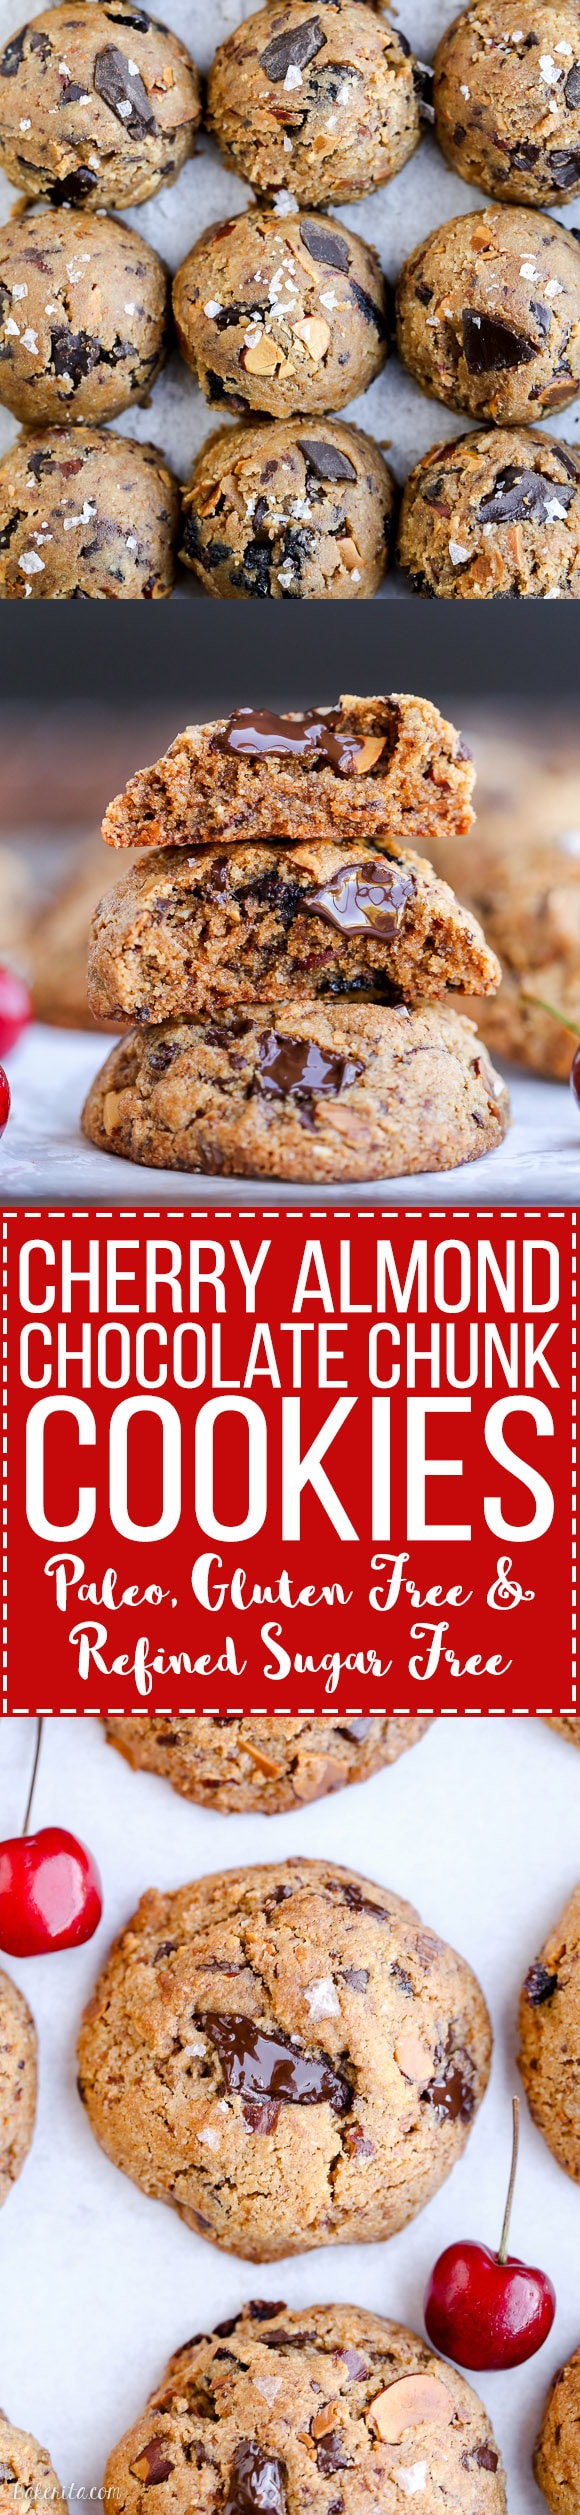 These Paleo Cherry Almond Chocolate Chunk Cookies are chewy, gooey, and absolutely delicious! These gluten-free and refined sugar-free cookies are loaded with toasted almonds, dried Bing cherries and dark chocolate chunks, sprinkled with flaky sea salt.